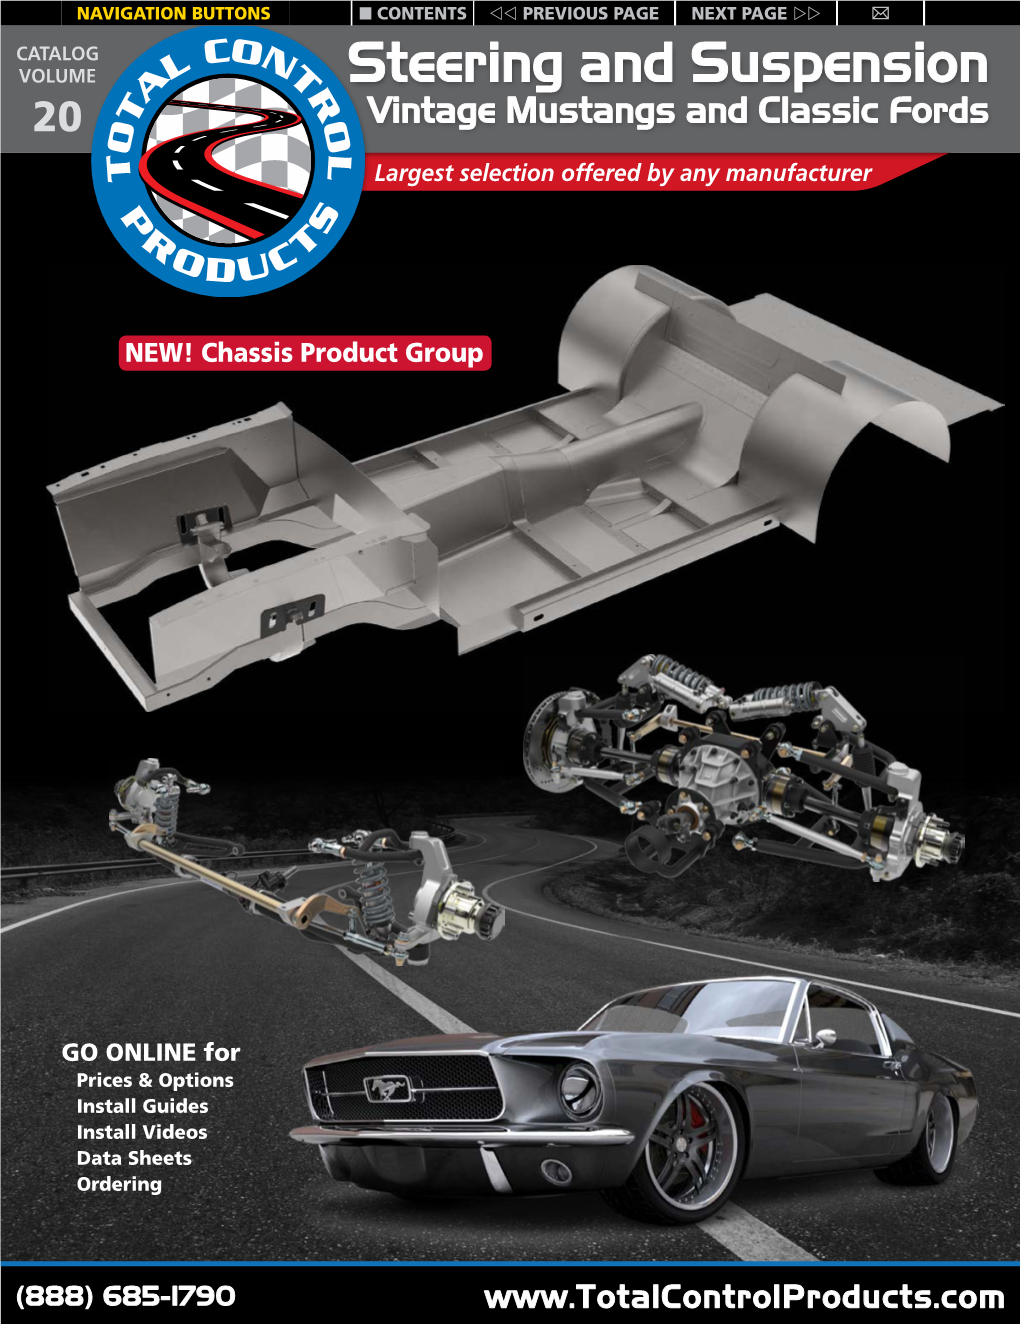 Steering and Suspension 20 Vintage Mustangs and Classic Fords Largest Selection Offered by Any Manufacturer